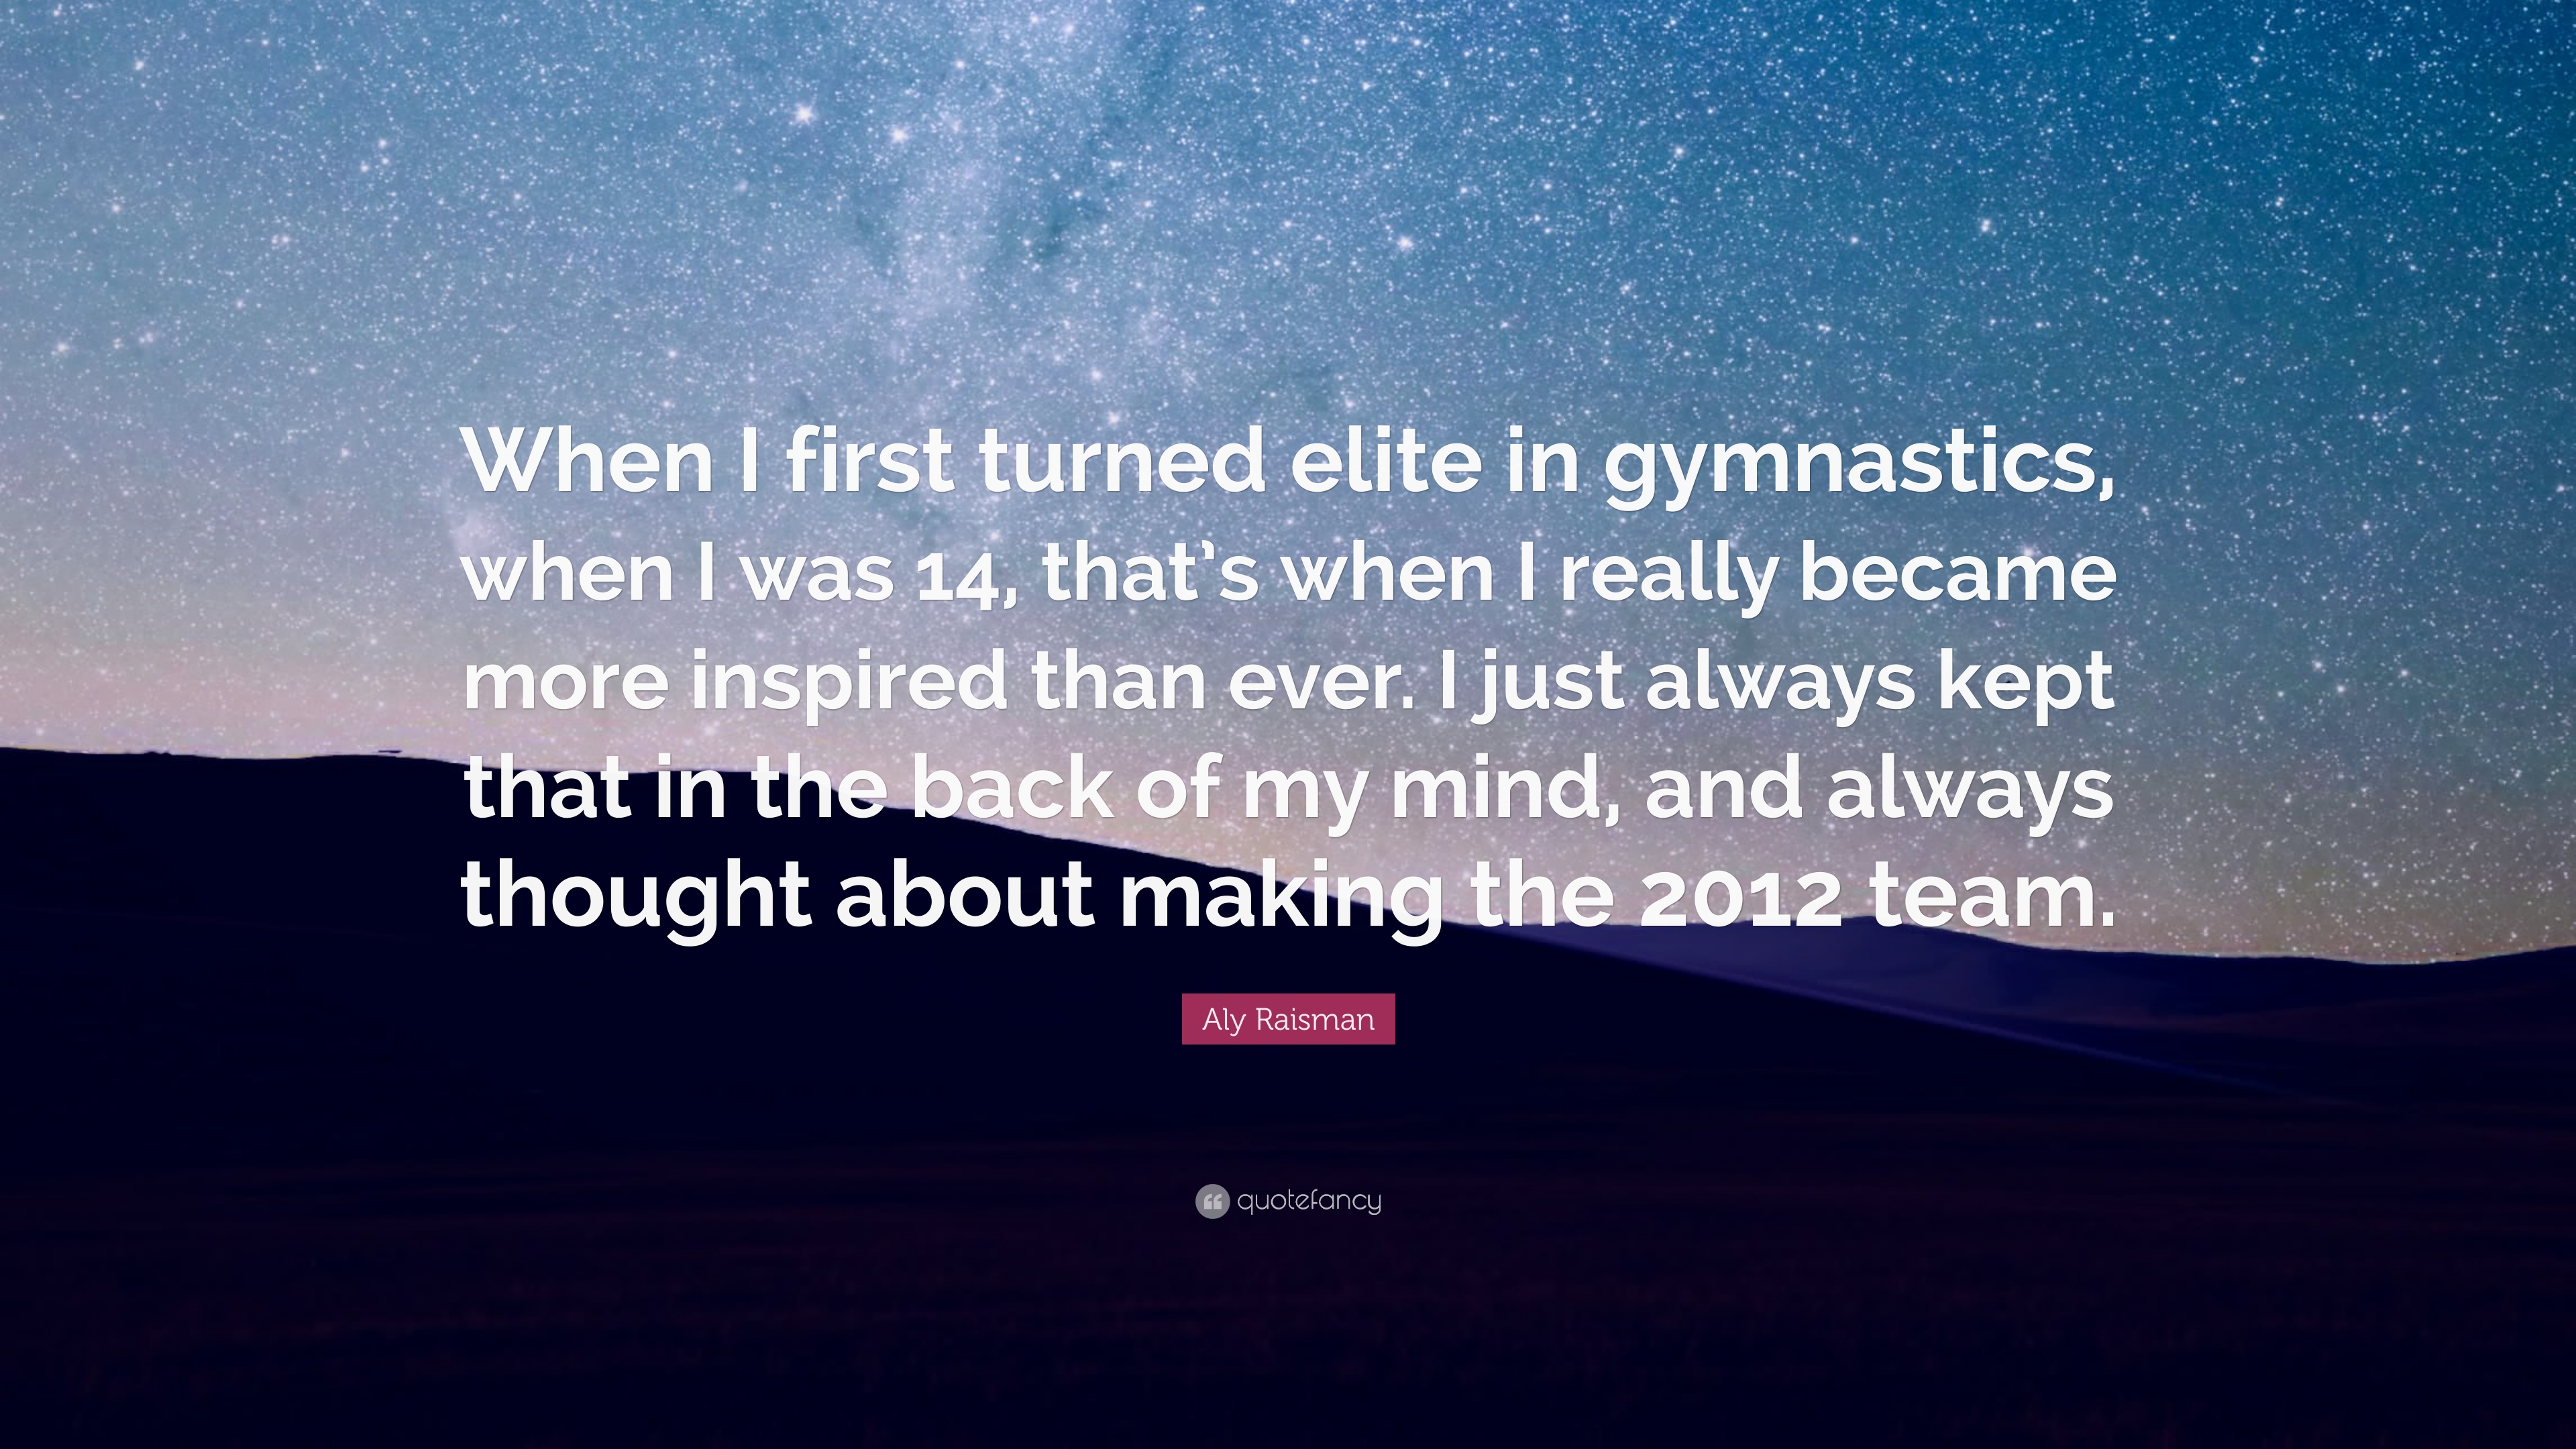 Aly Raisman Quote: “When I first turned elite in gymnastics, when I